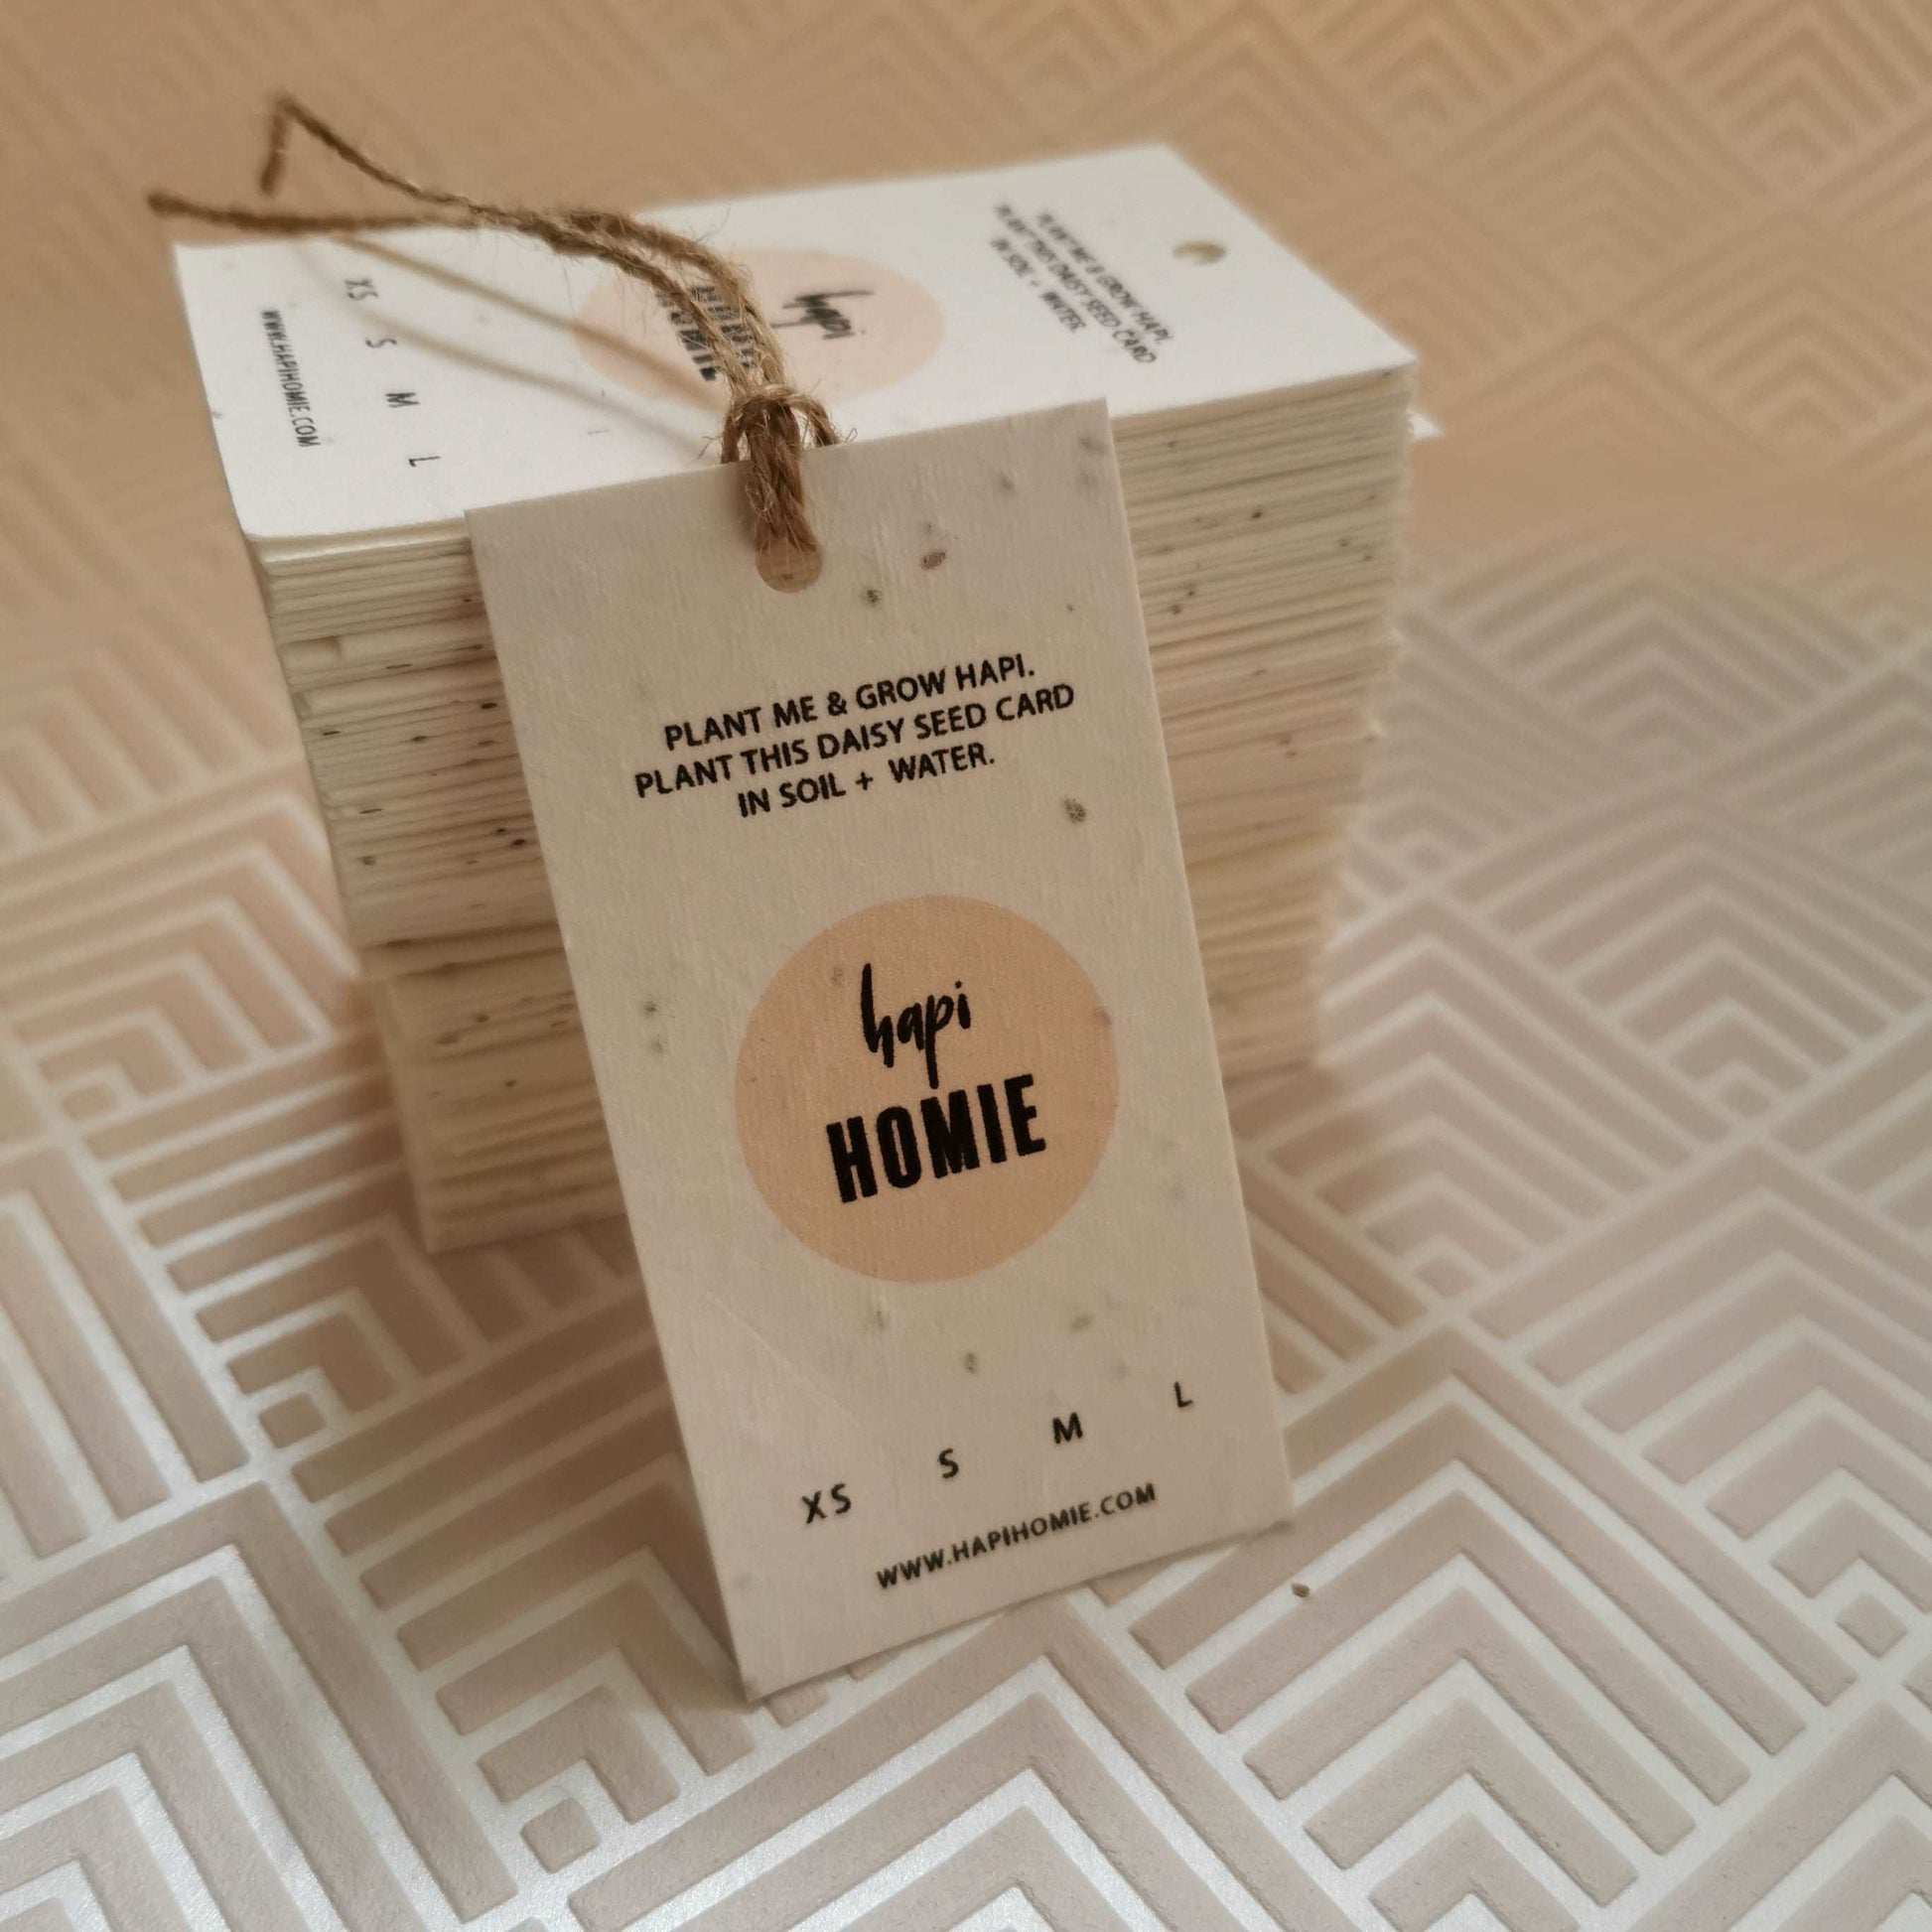 Seed paper plantable gift tags from our i-grow collection : Feathers –  7ArtisanStreet